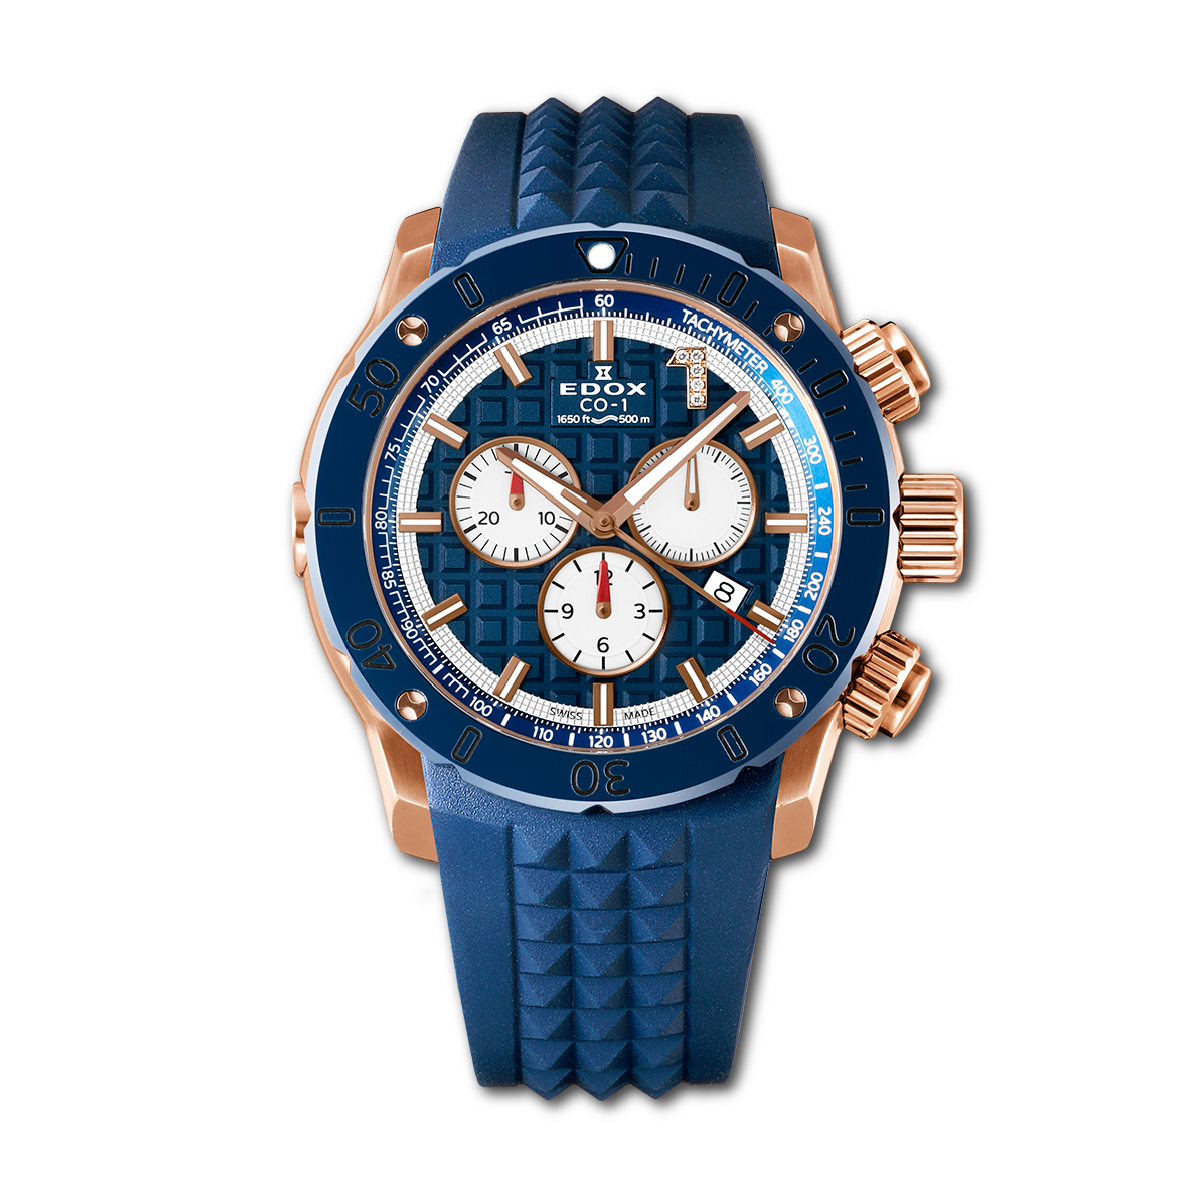 CHRONOFFSHORE-1 CHRONOGRAPH LIMITED EDITION